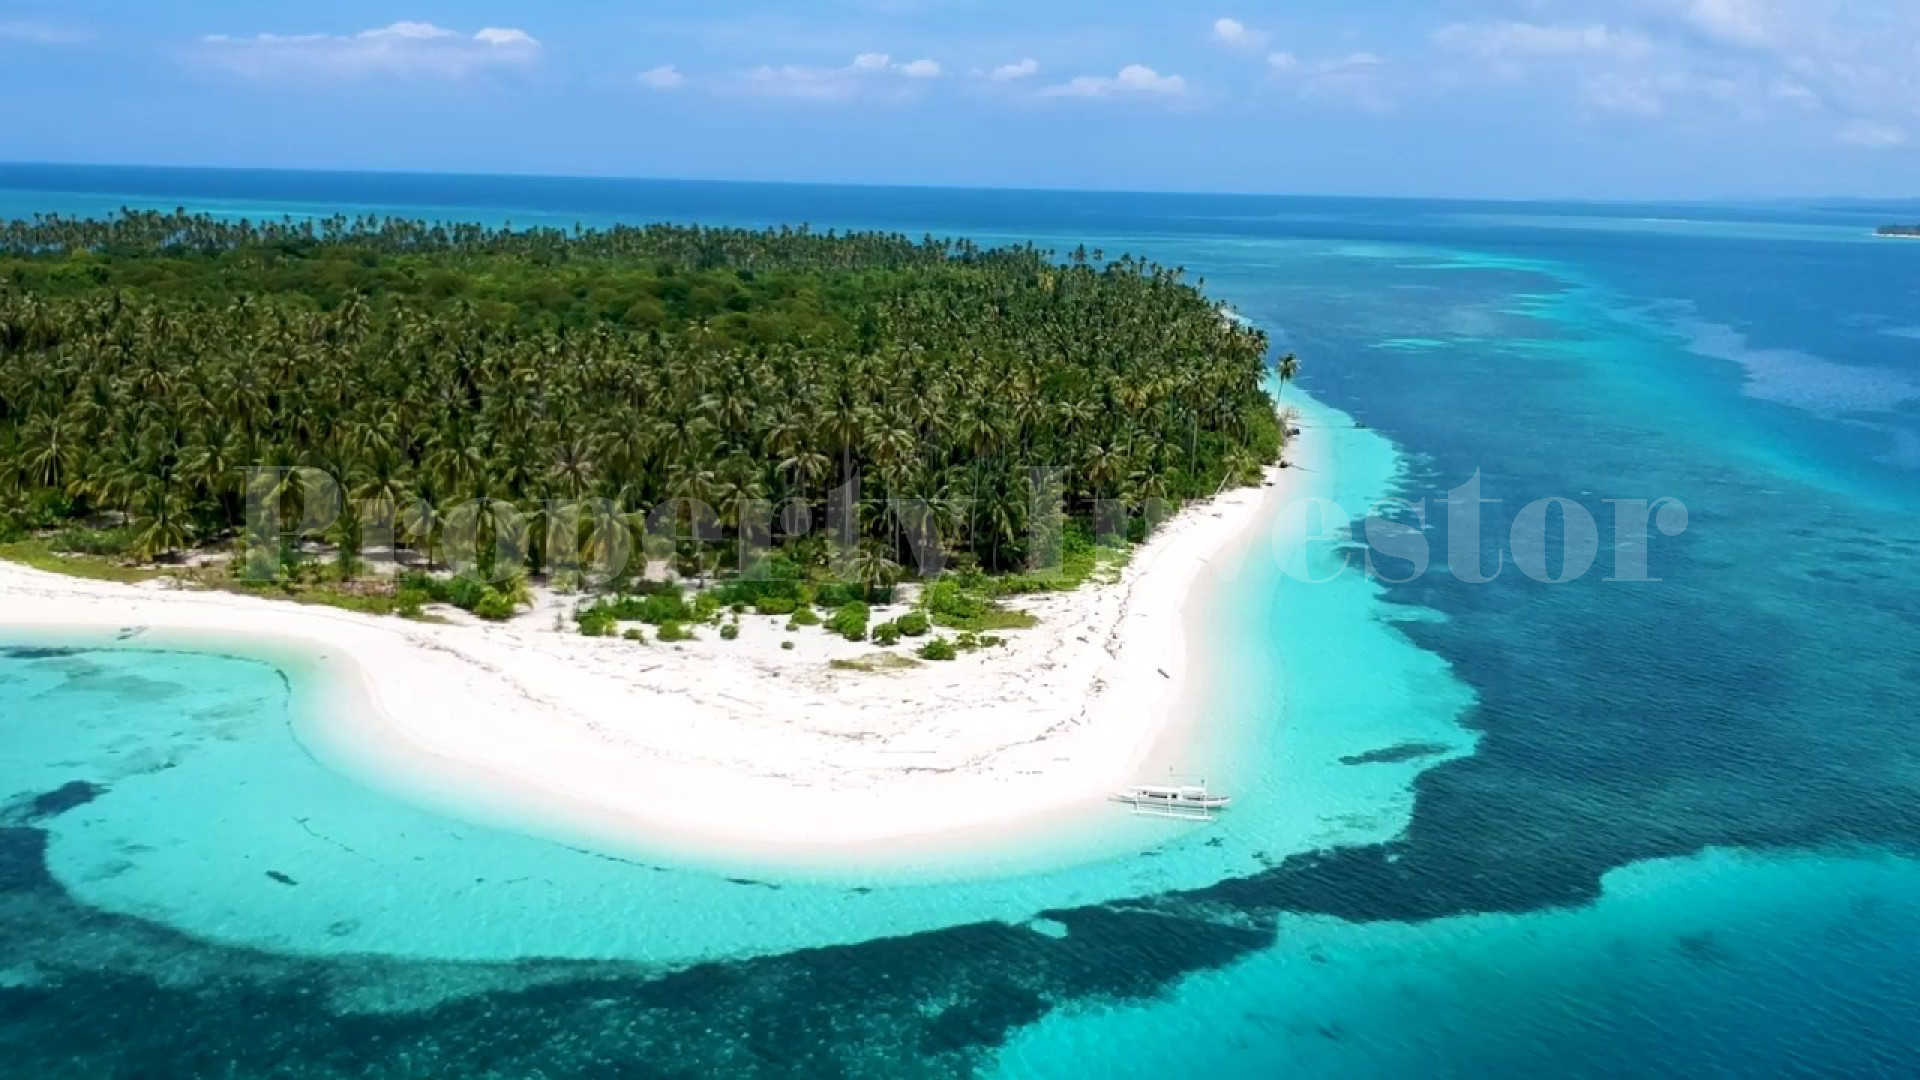 Exclusive 20.8 Hectare Parcel of Beautiful Beachfront Land for Sale in Balabac, Palawan